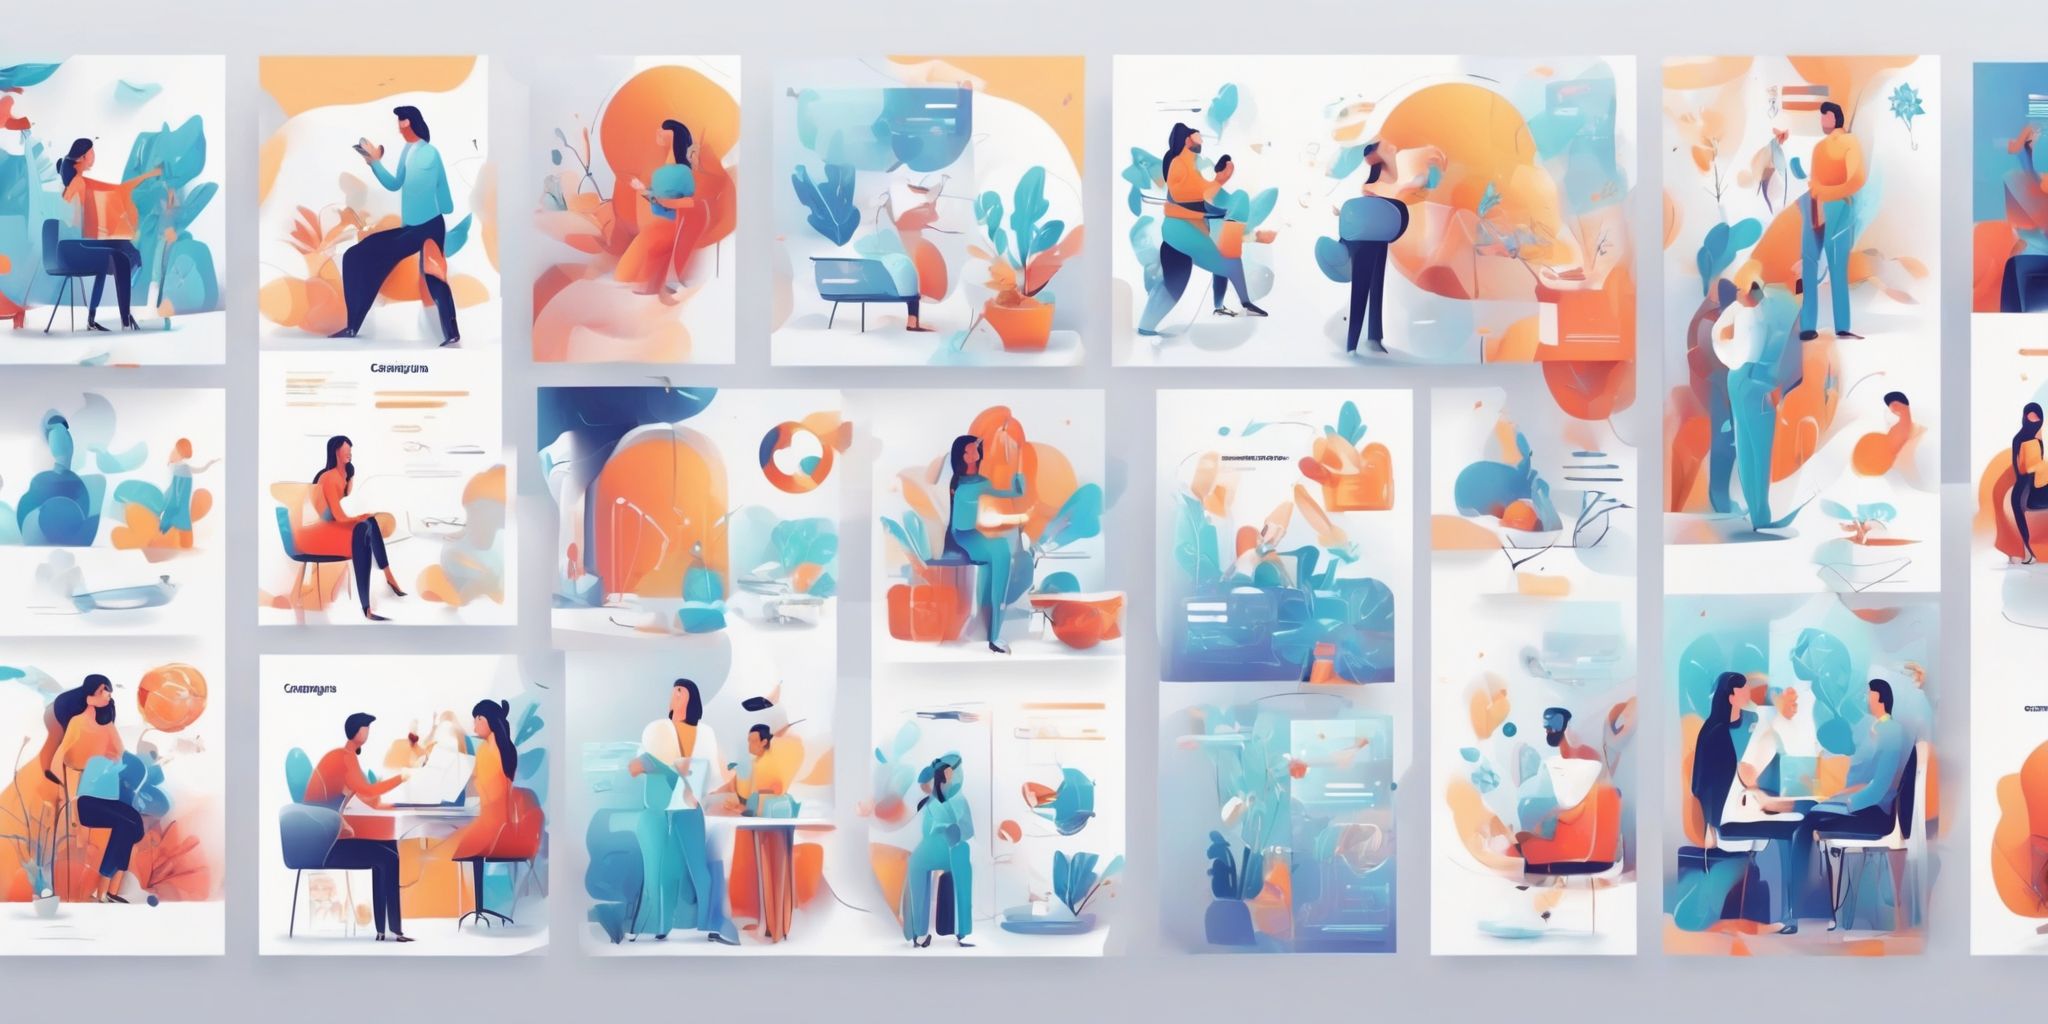 Campaigns in illustration style with gradients and white background